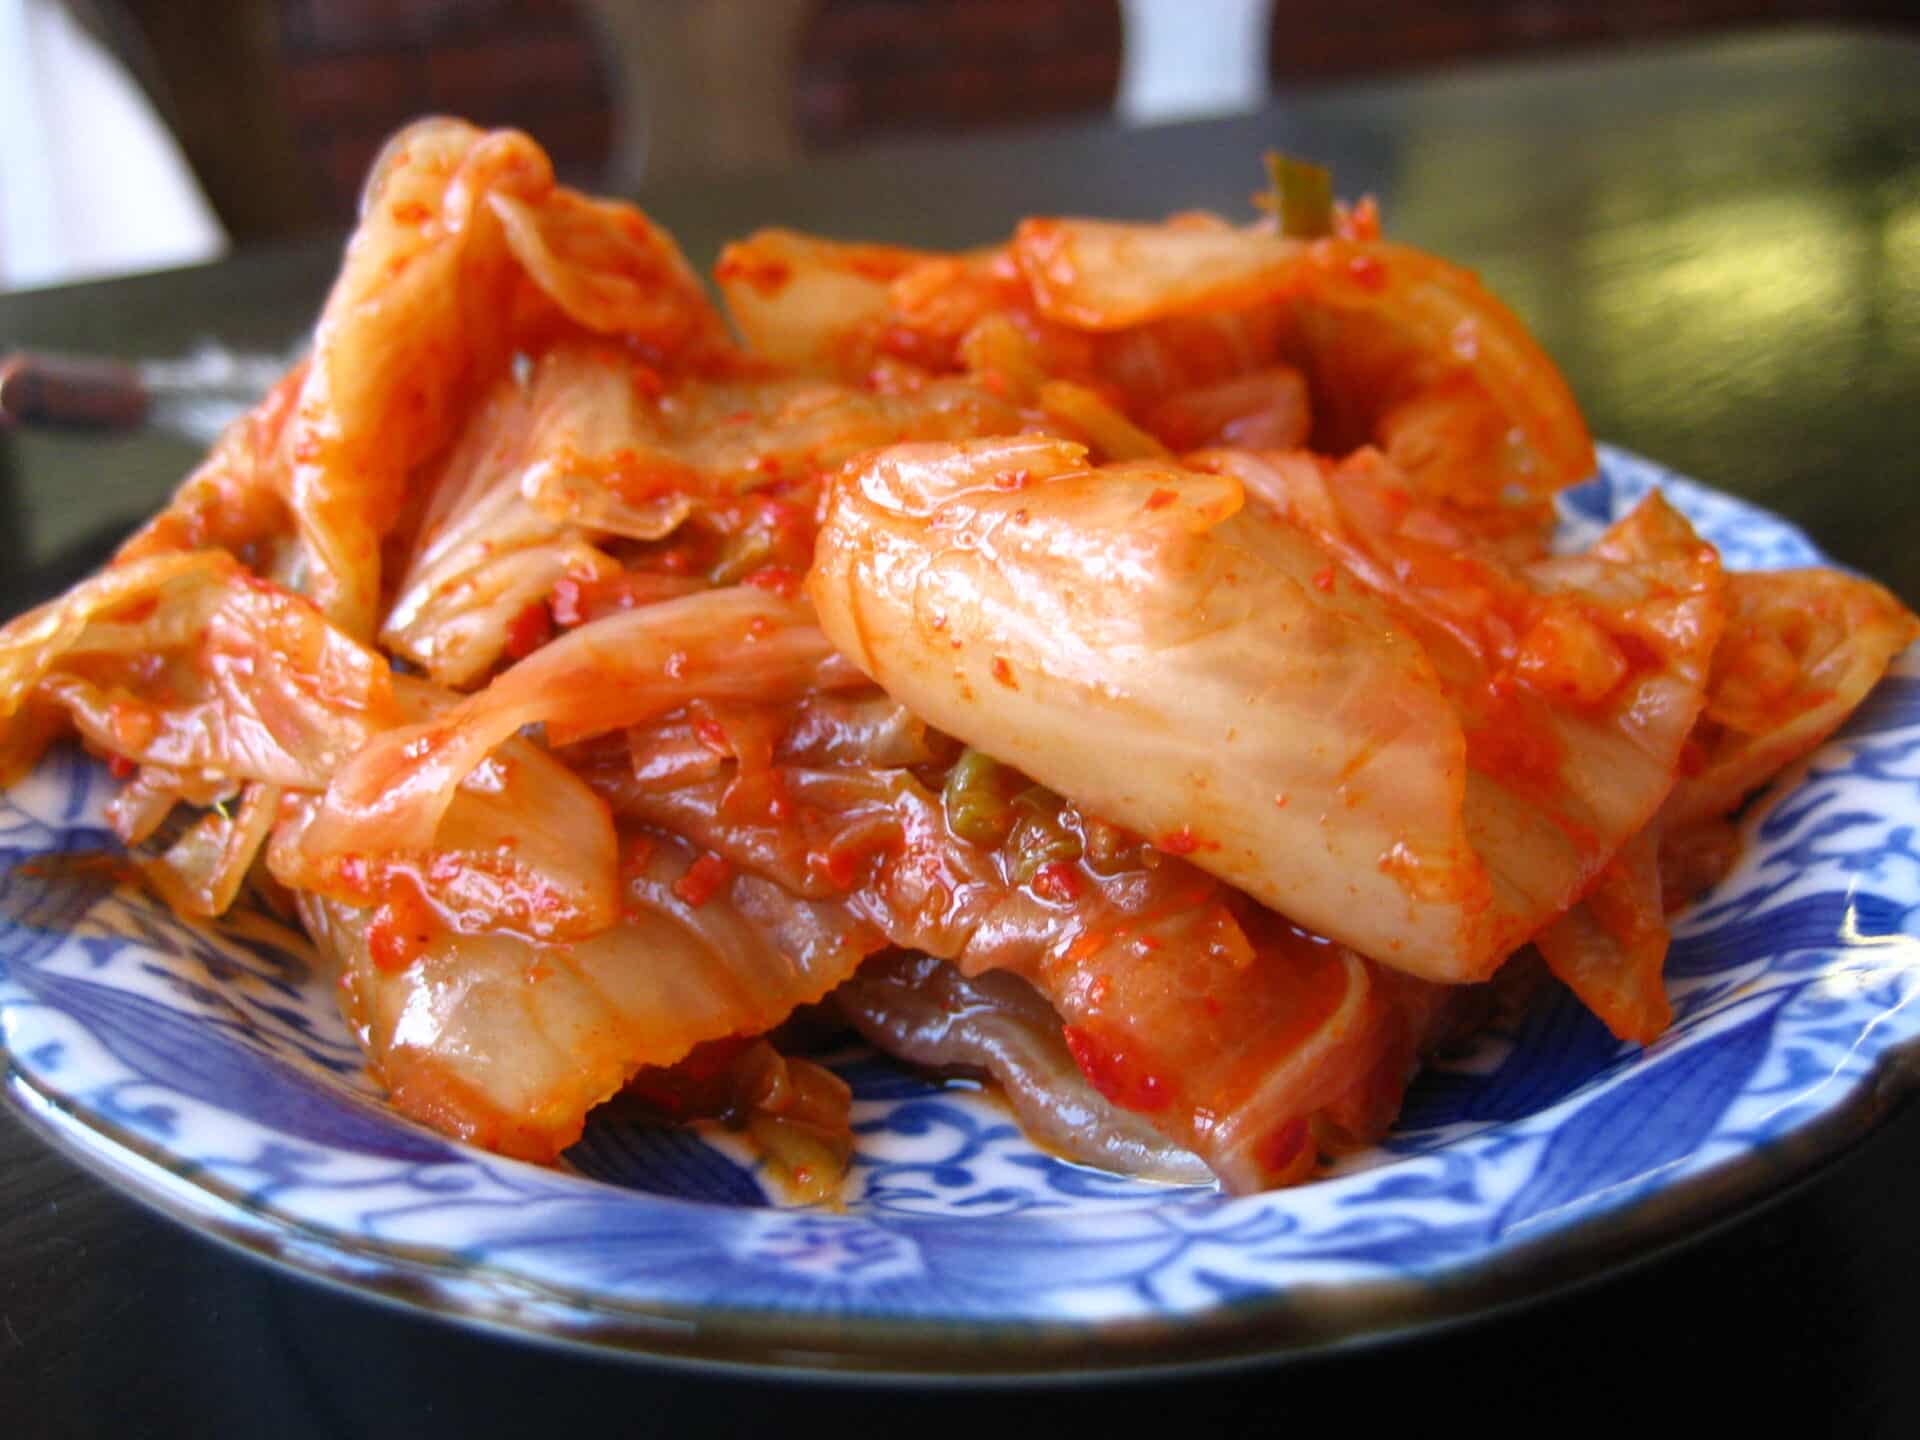 Can You Eat Kimchi While Pregnant?